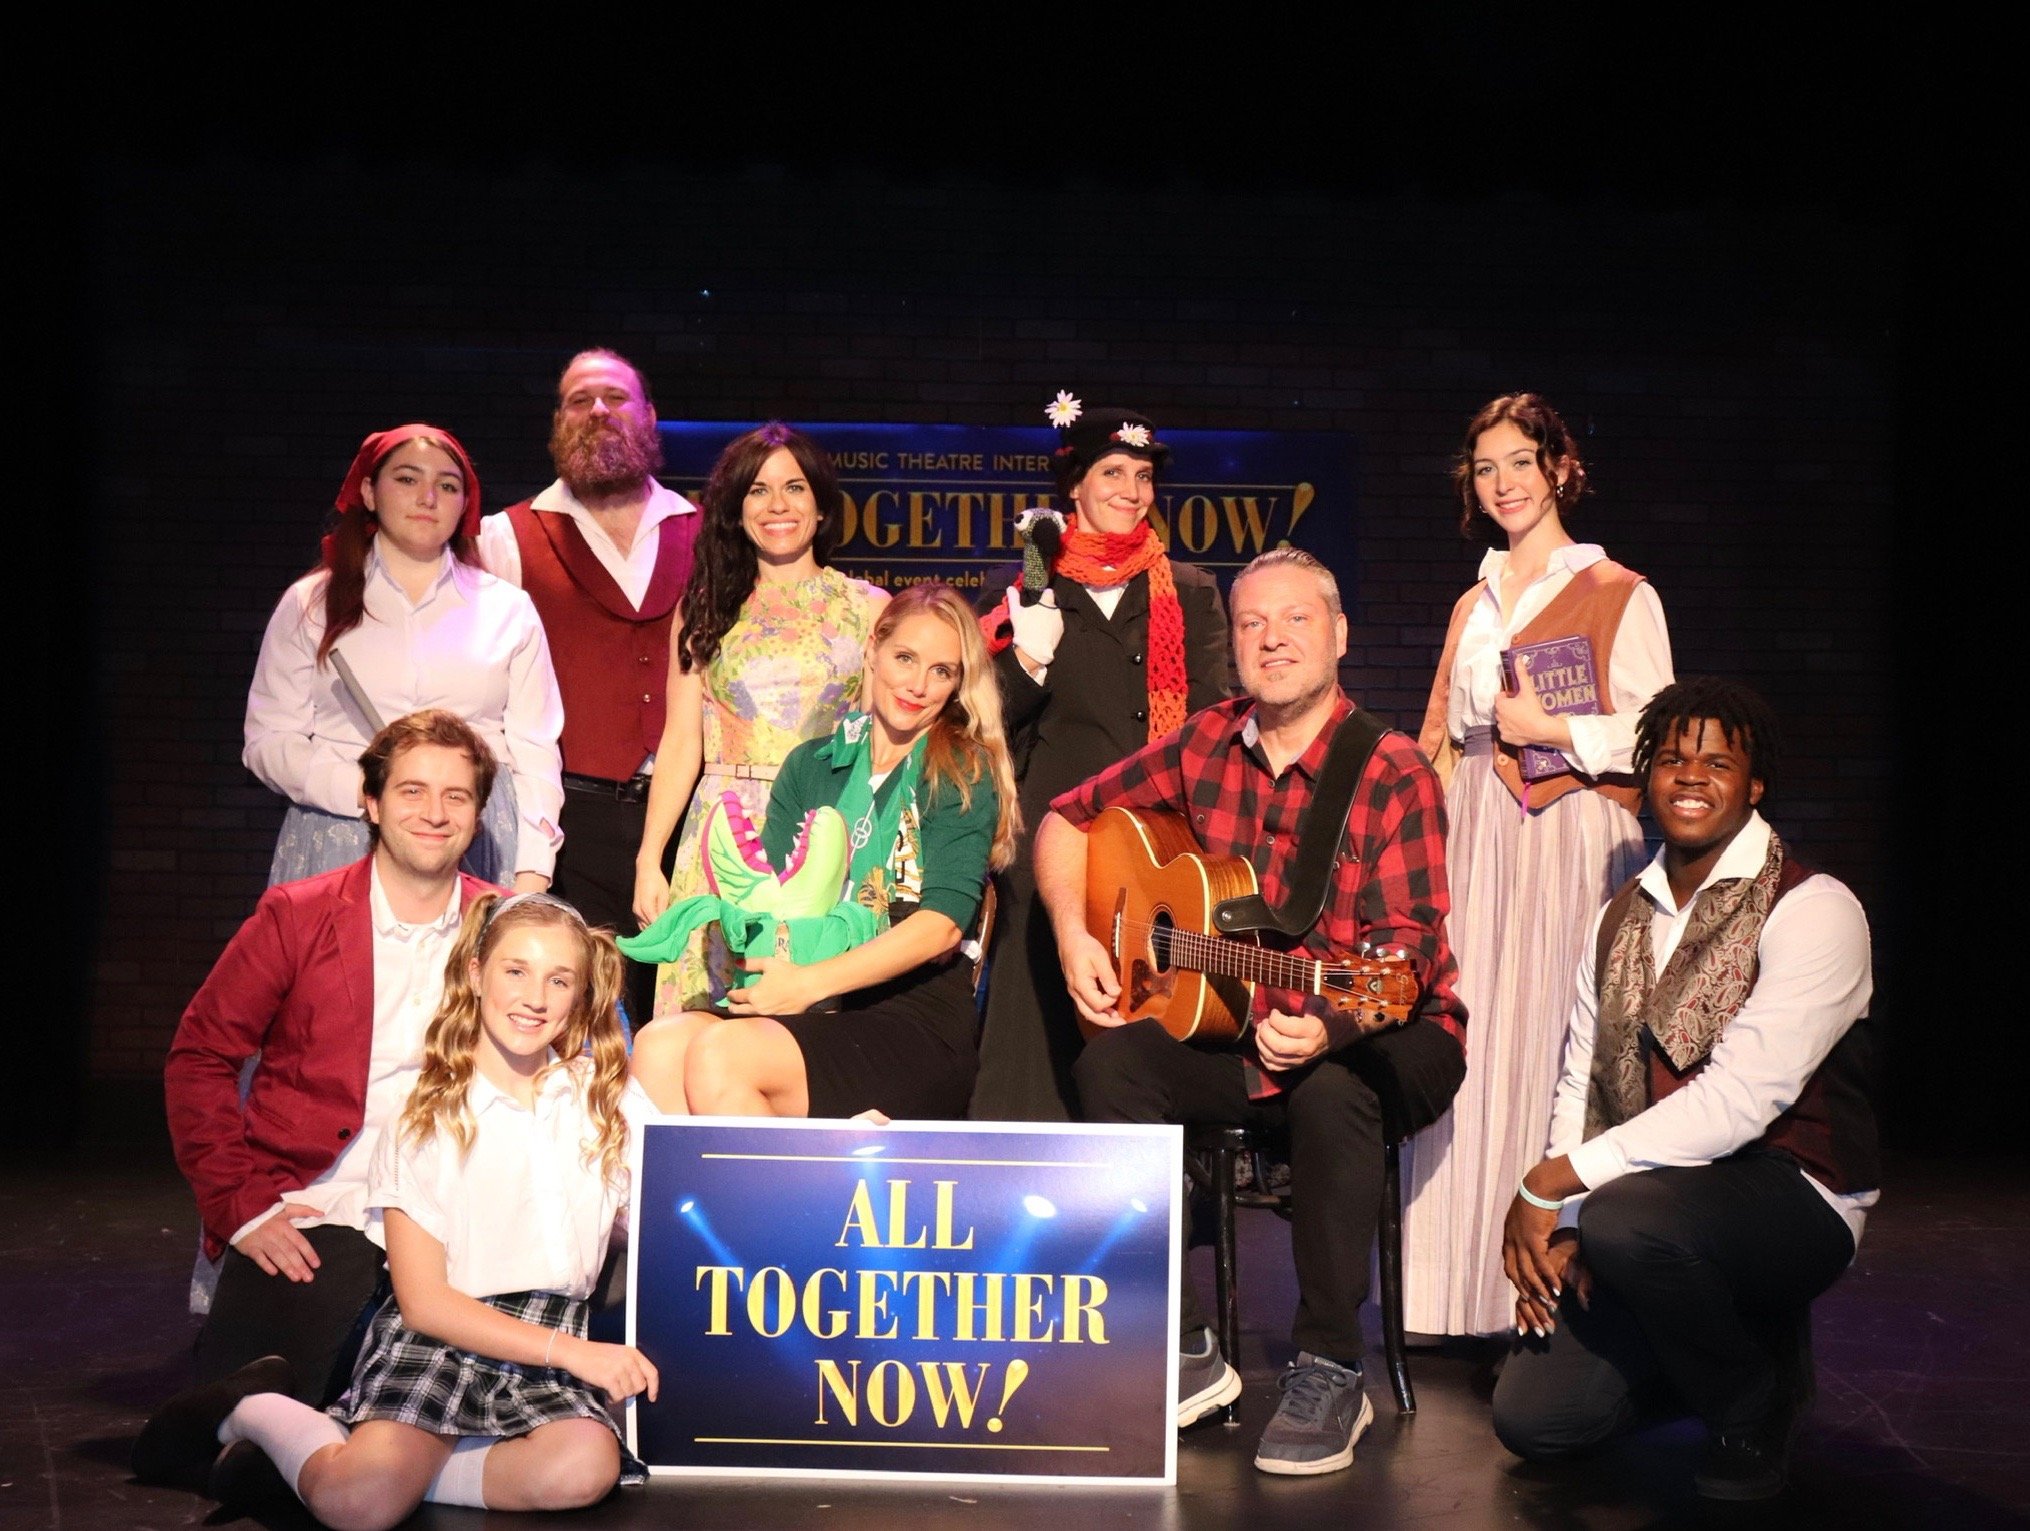 Image from our recent production of MTI's All Together Now!